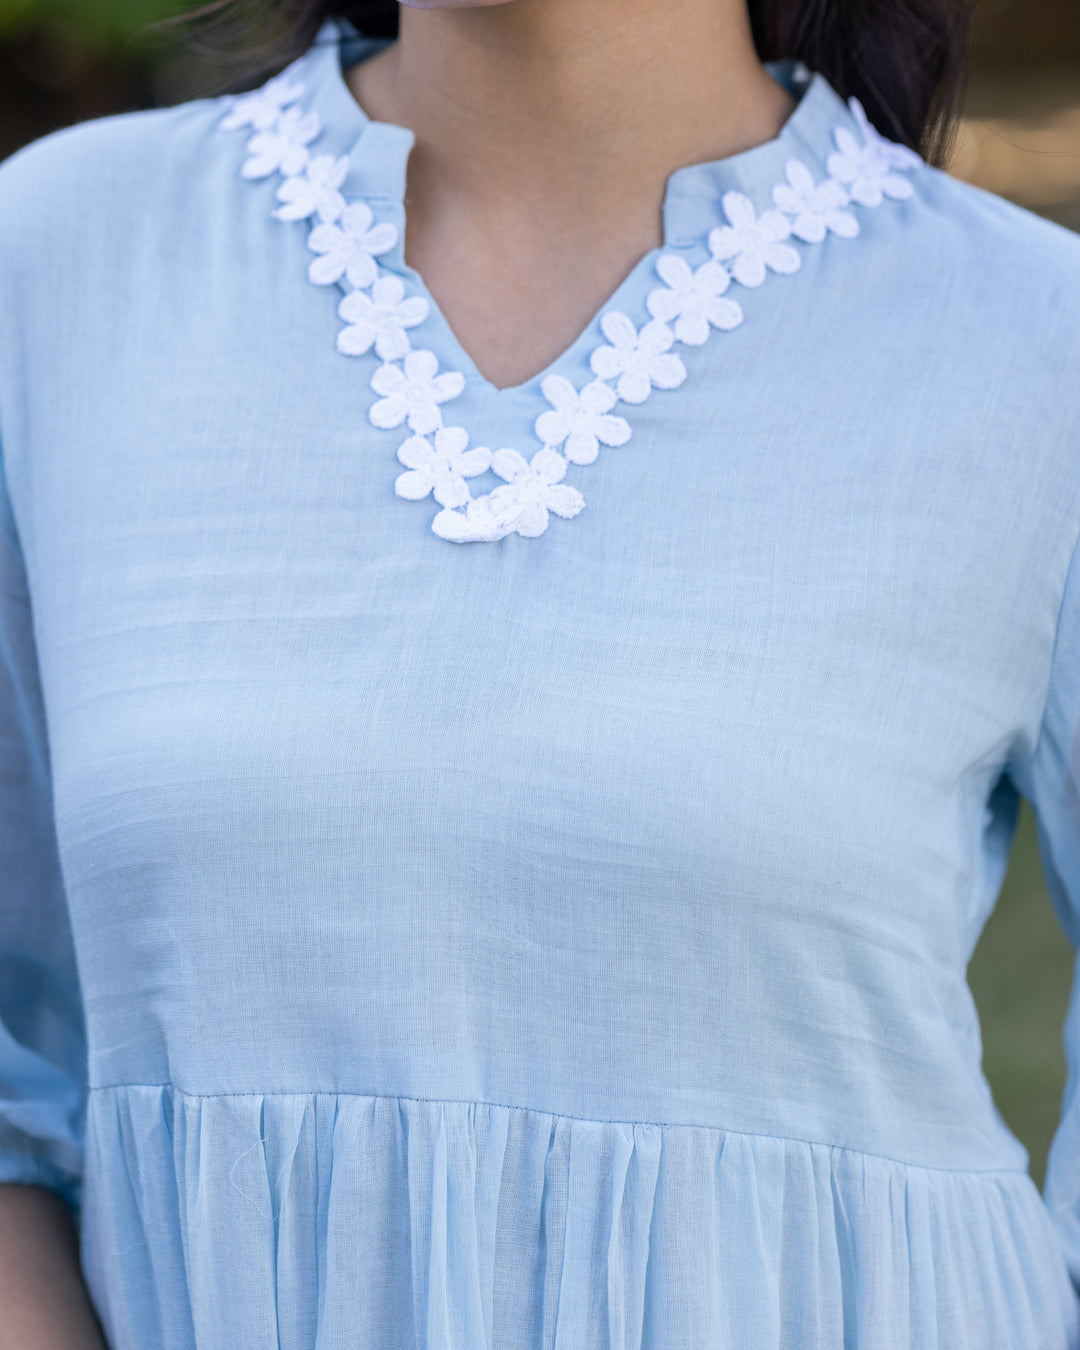 Pastel Blue Lace & Tiered Dress